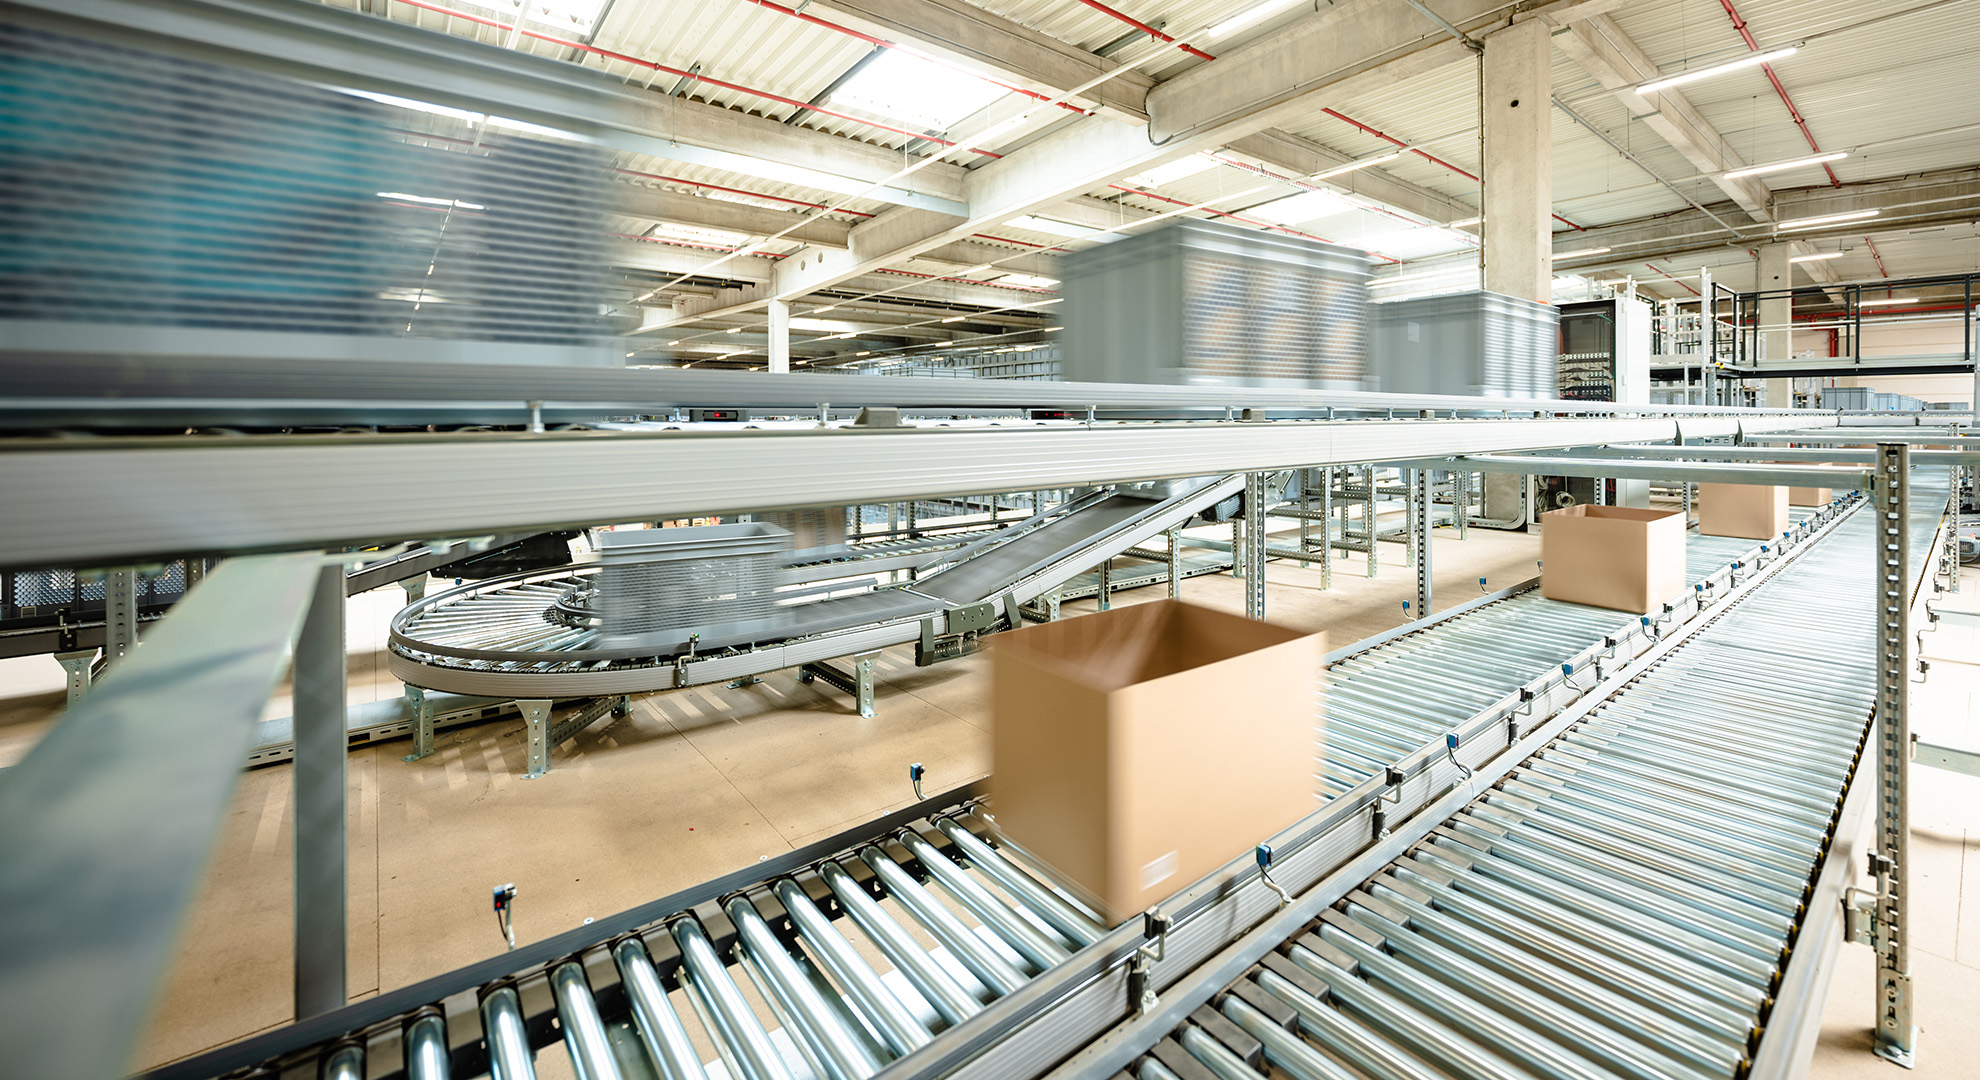 Several packages travel on a conveyor belt in a warehouse.